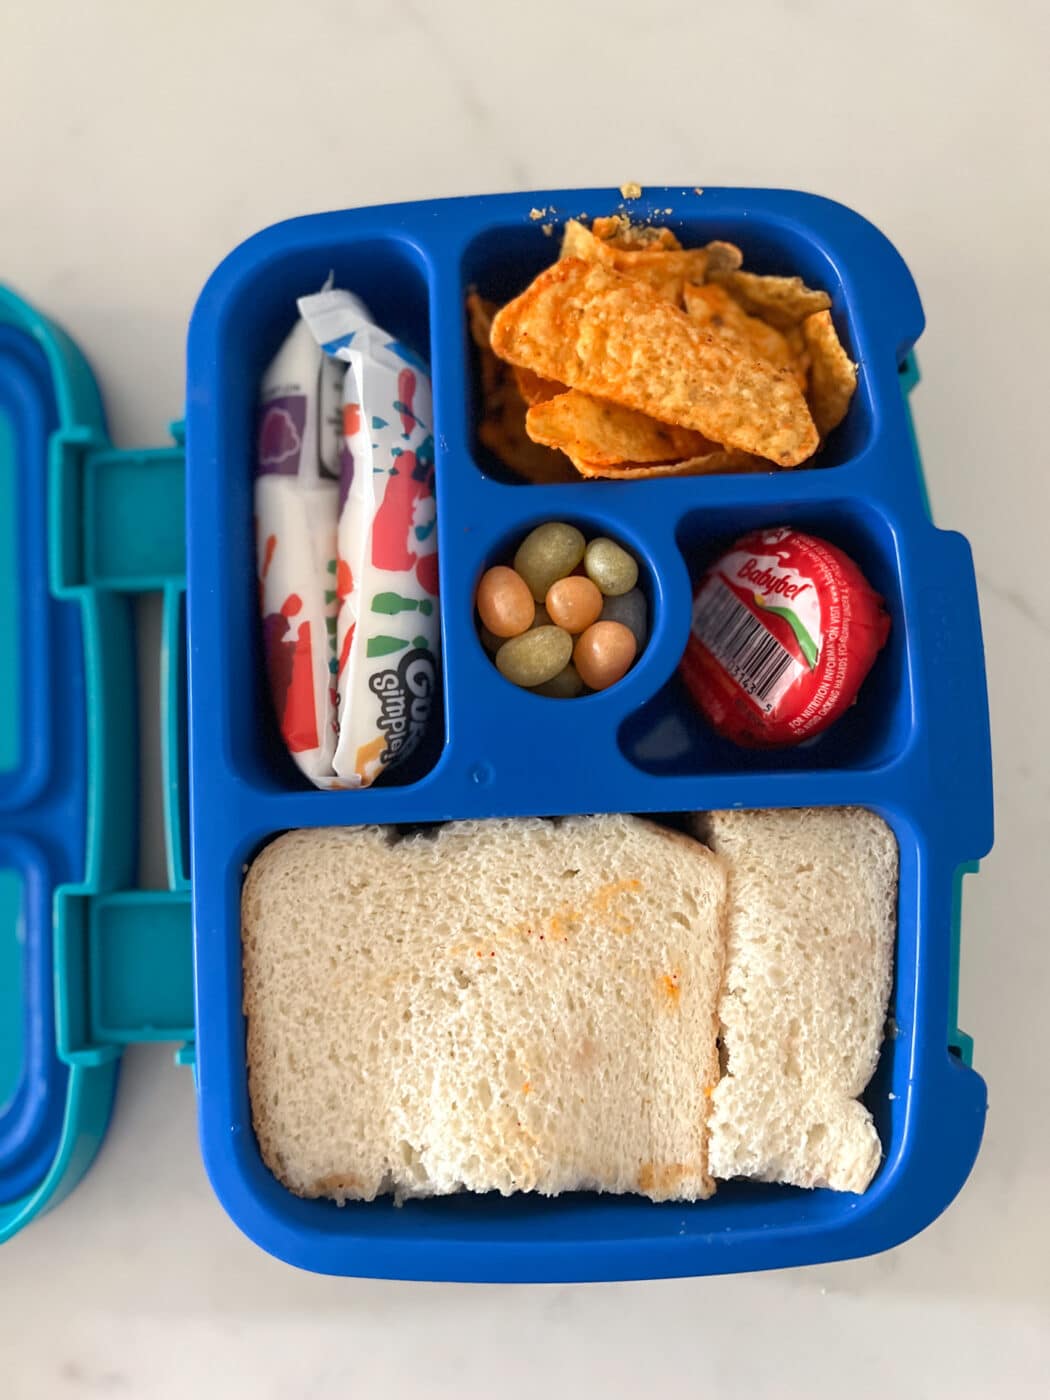 What to pack in a Bento lunchbox.